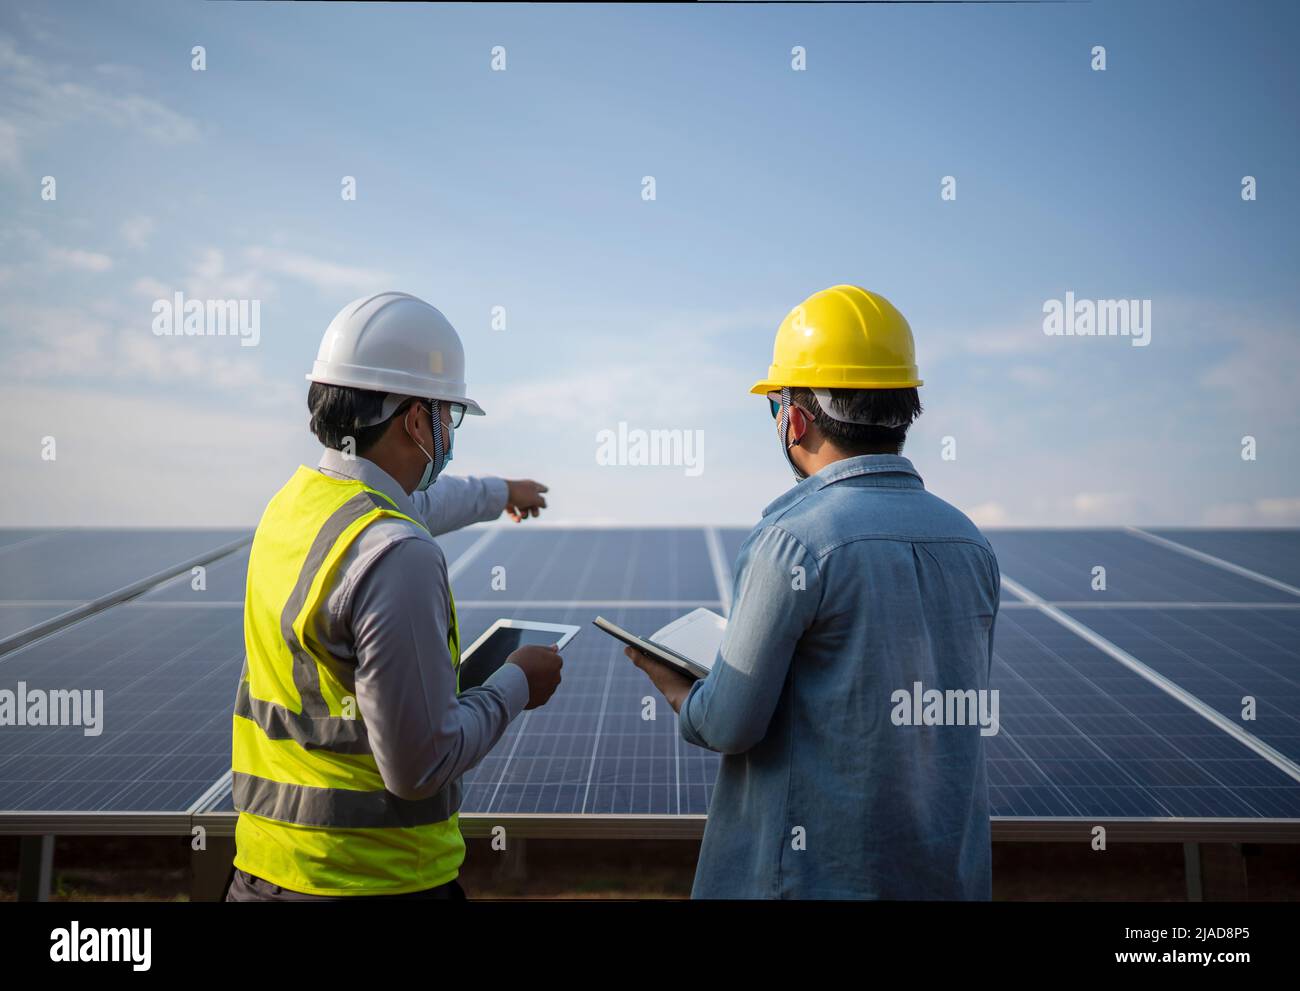 Two engineers standing next to solar panels at a solar powered station talking, Thailand Stock Photo